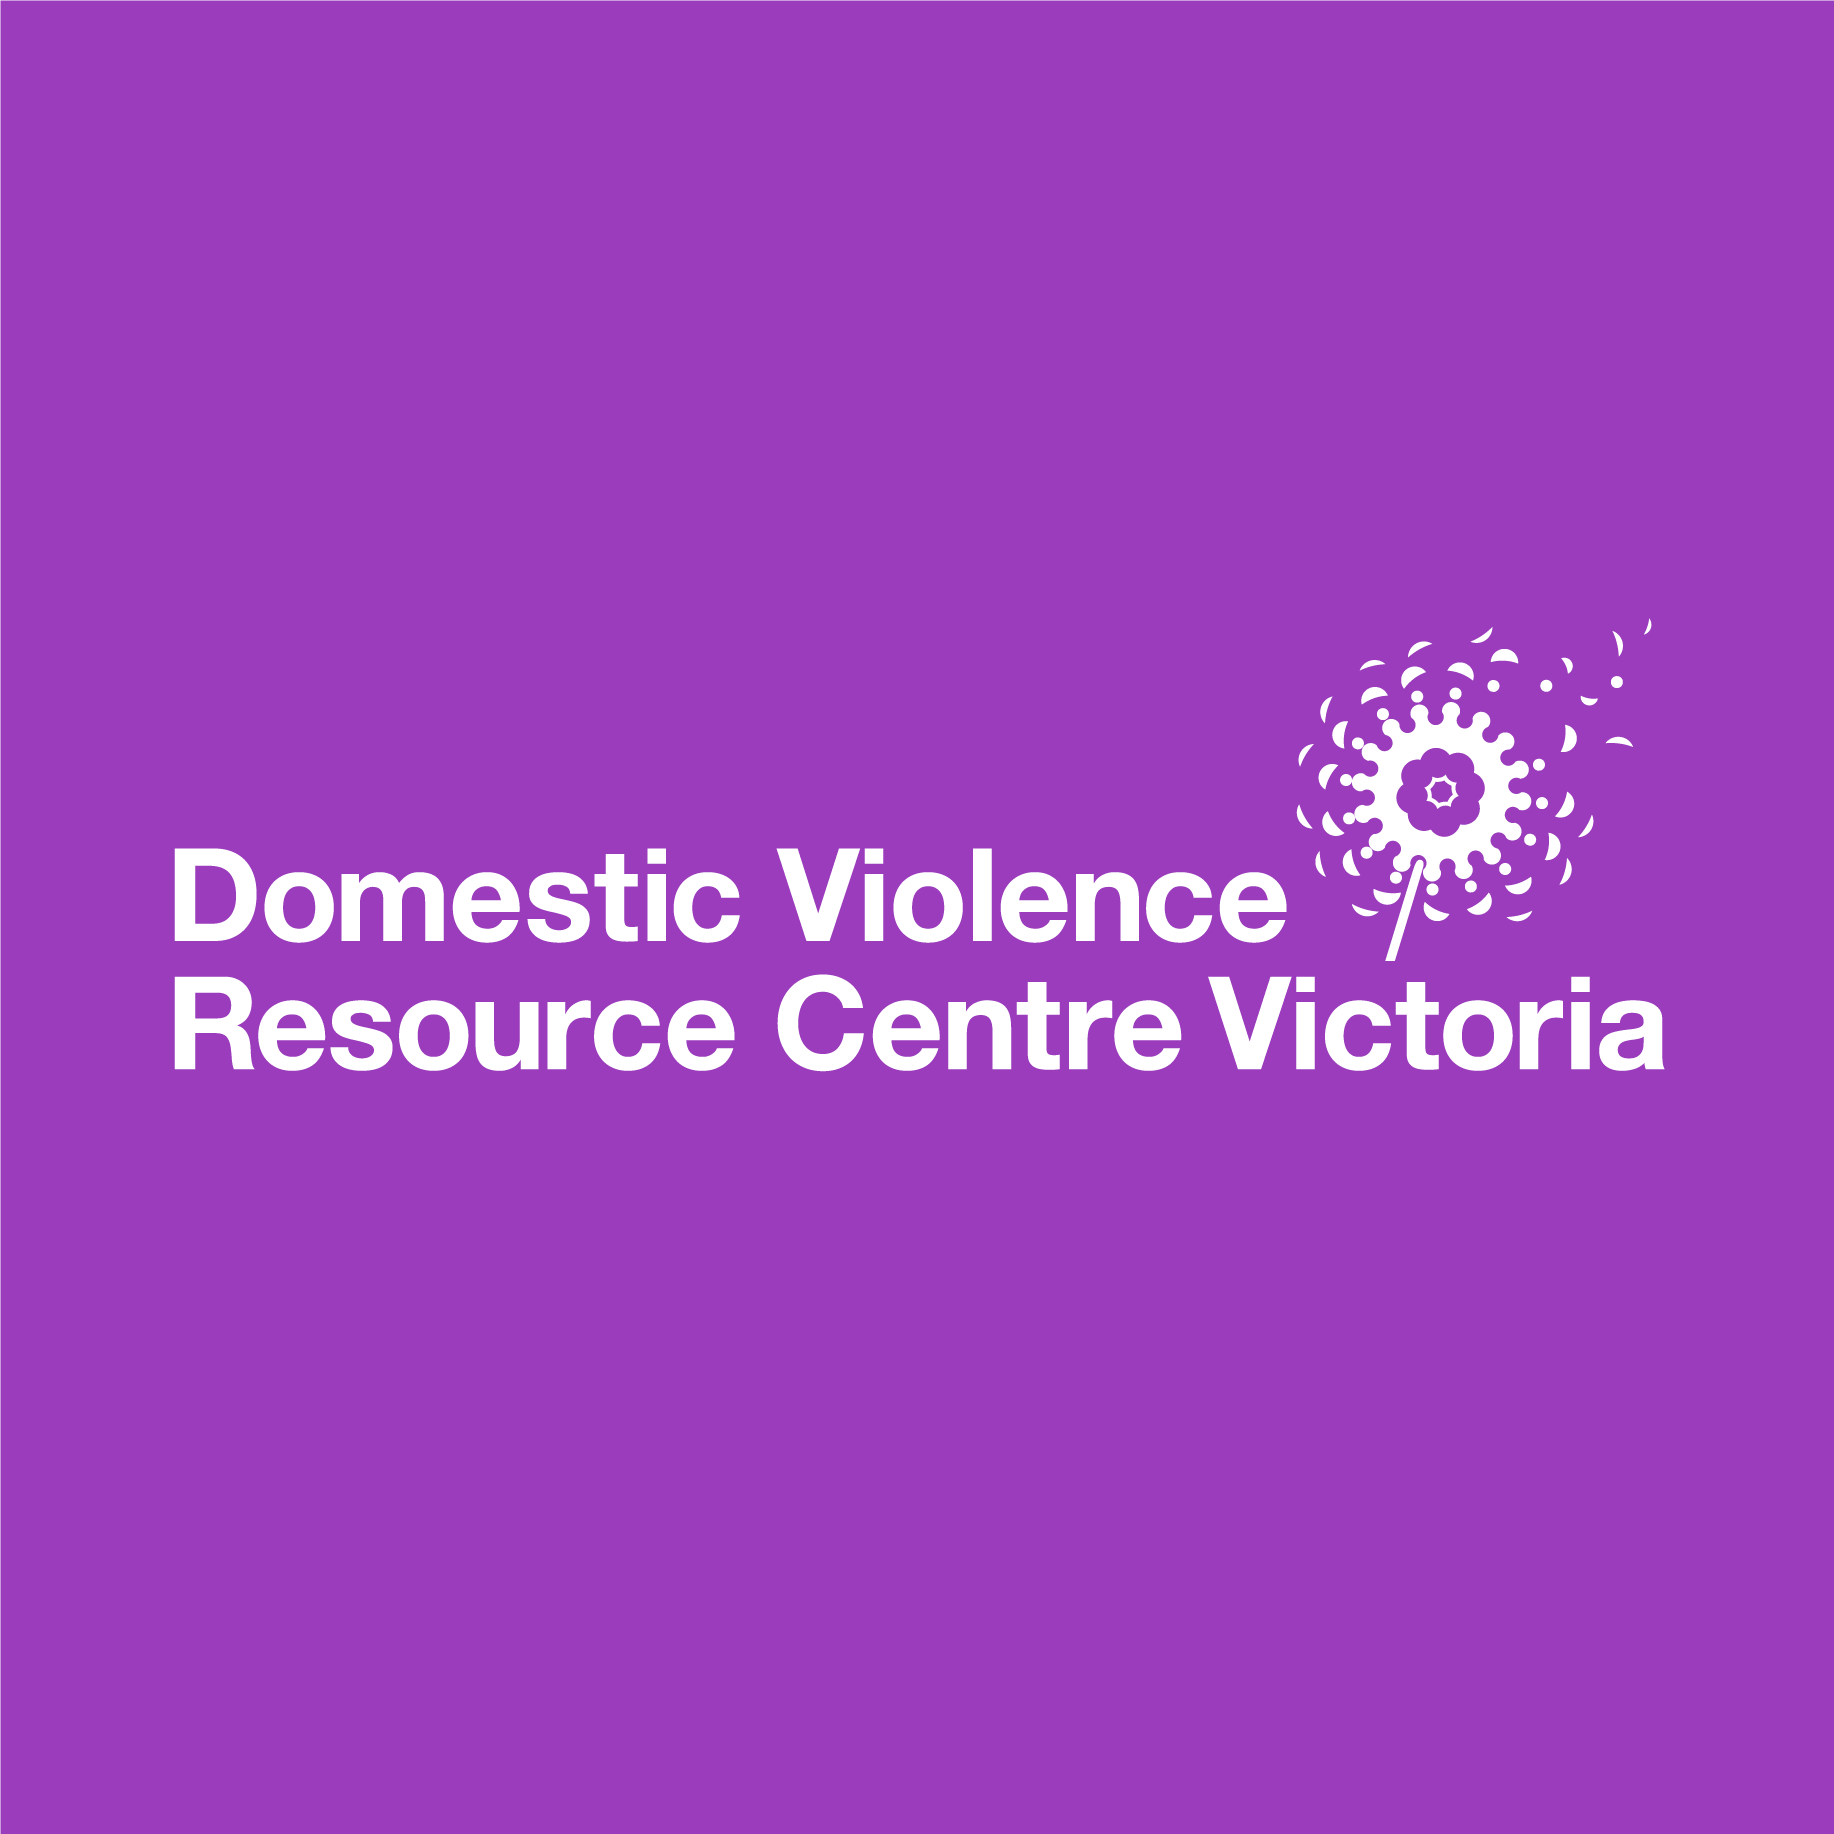 Universal Children’s Day and Family Violence Reform